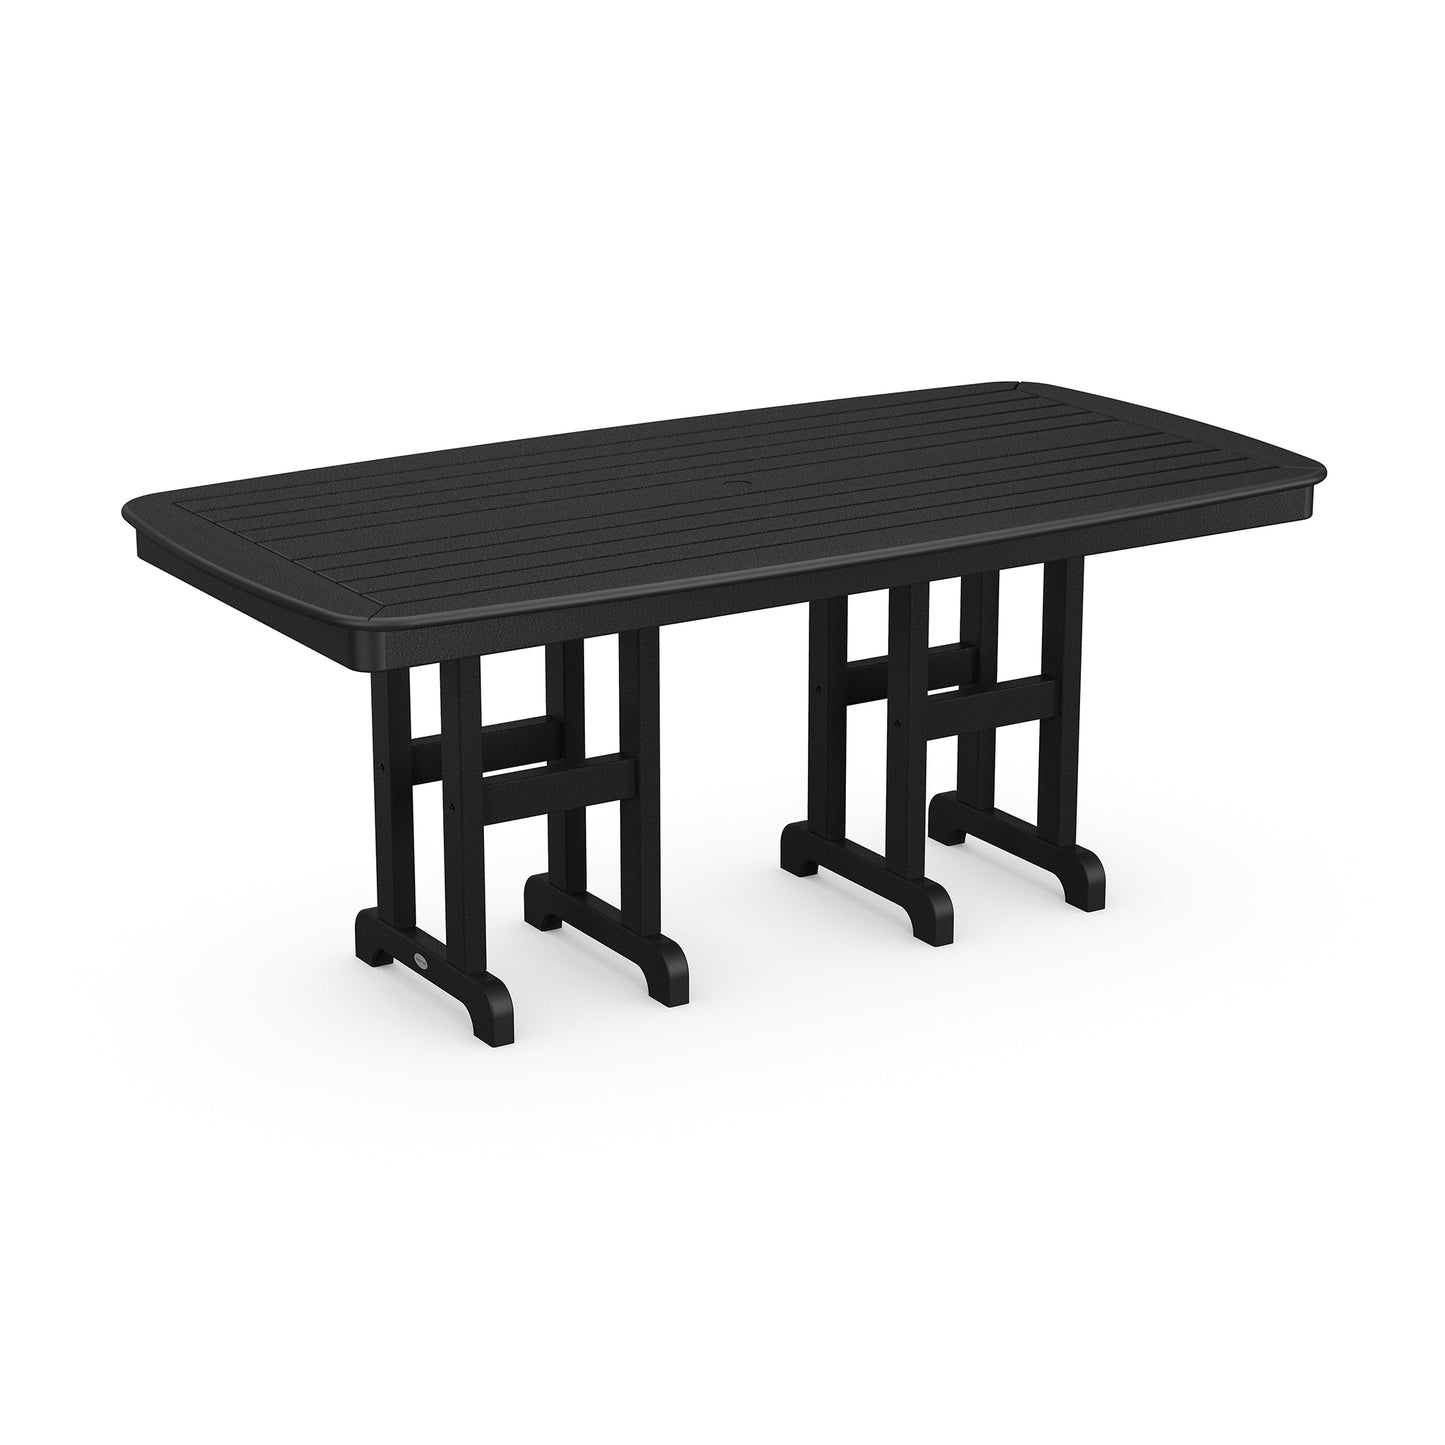 A modern black POLYWOOD Nautical 37" x 72" Rectangular Dining Table featuring a ribbed surface texture with an oblong top and four sturdy legs, isolated on a white background.